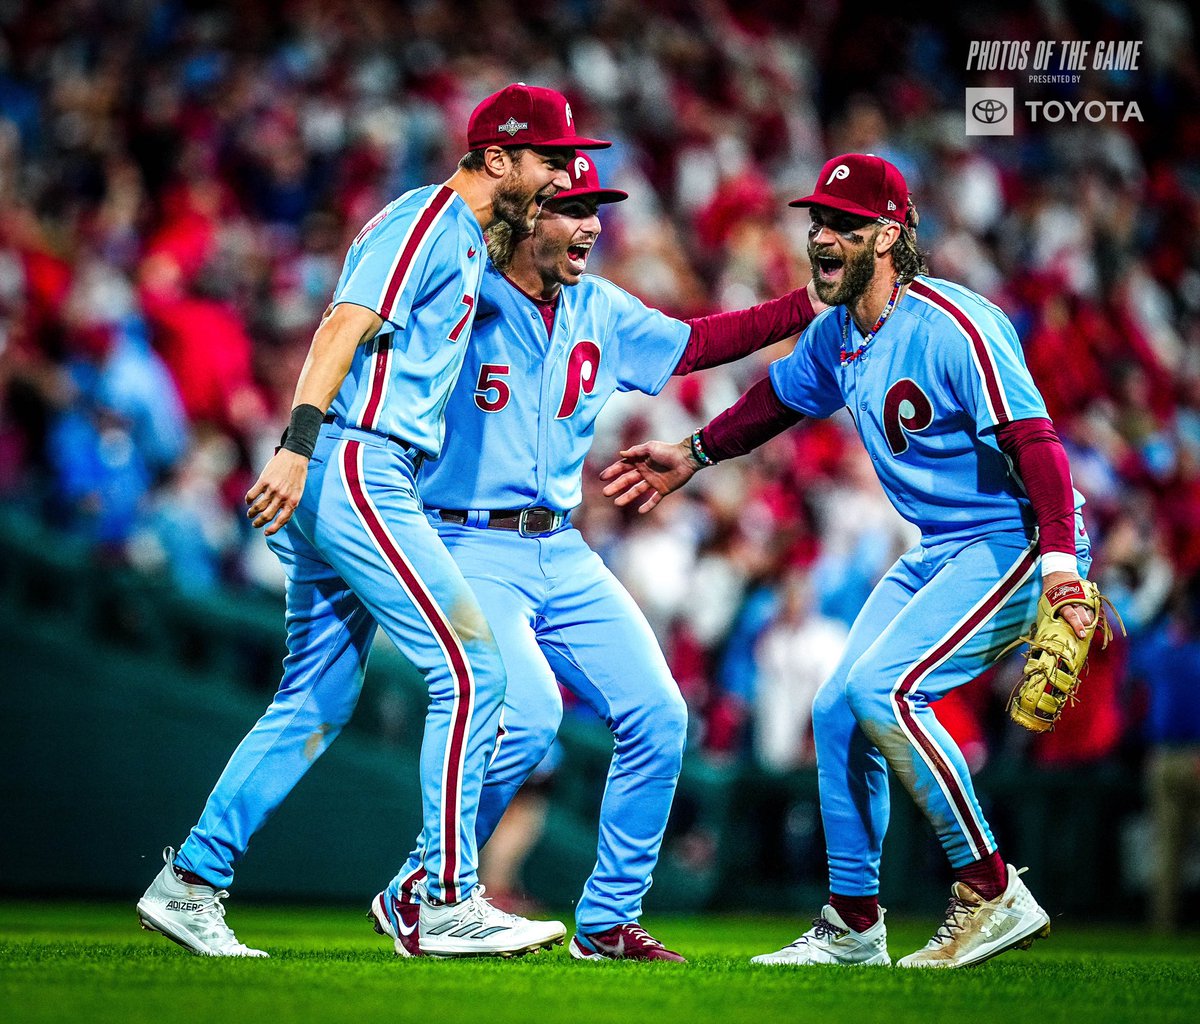 The Phils are back in the powder blues tonight! Aka the best throwback uniforms in baseball. 🩵⚾️